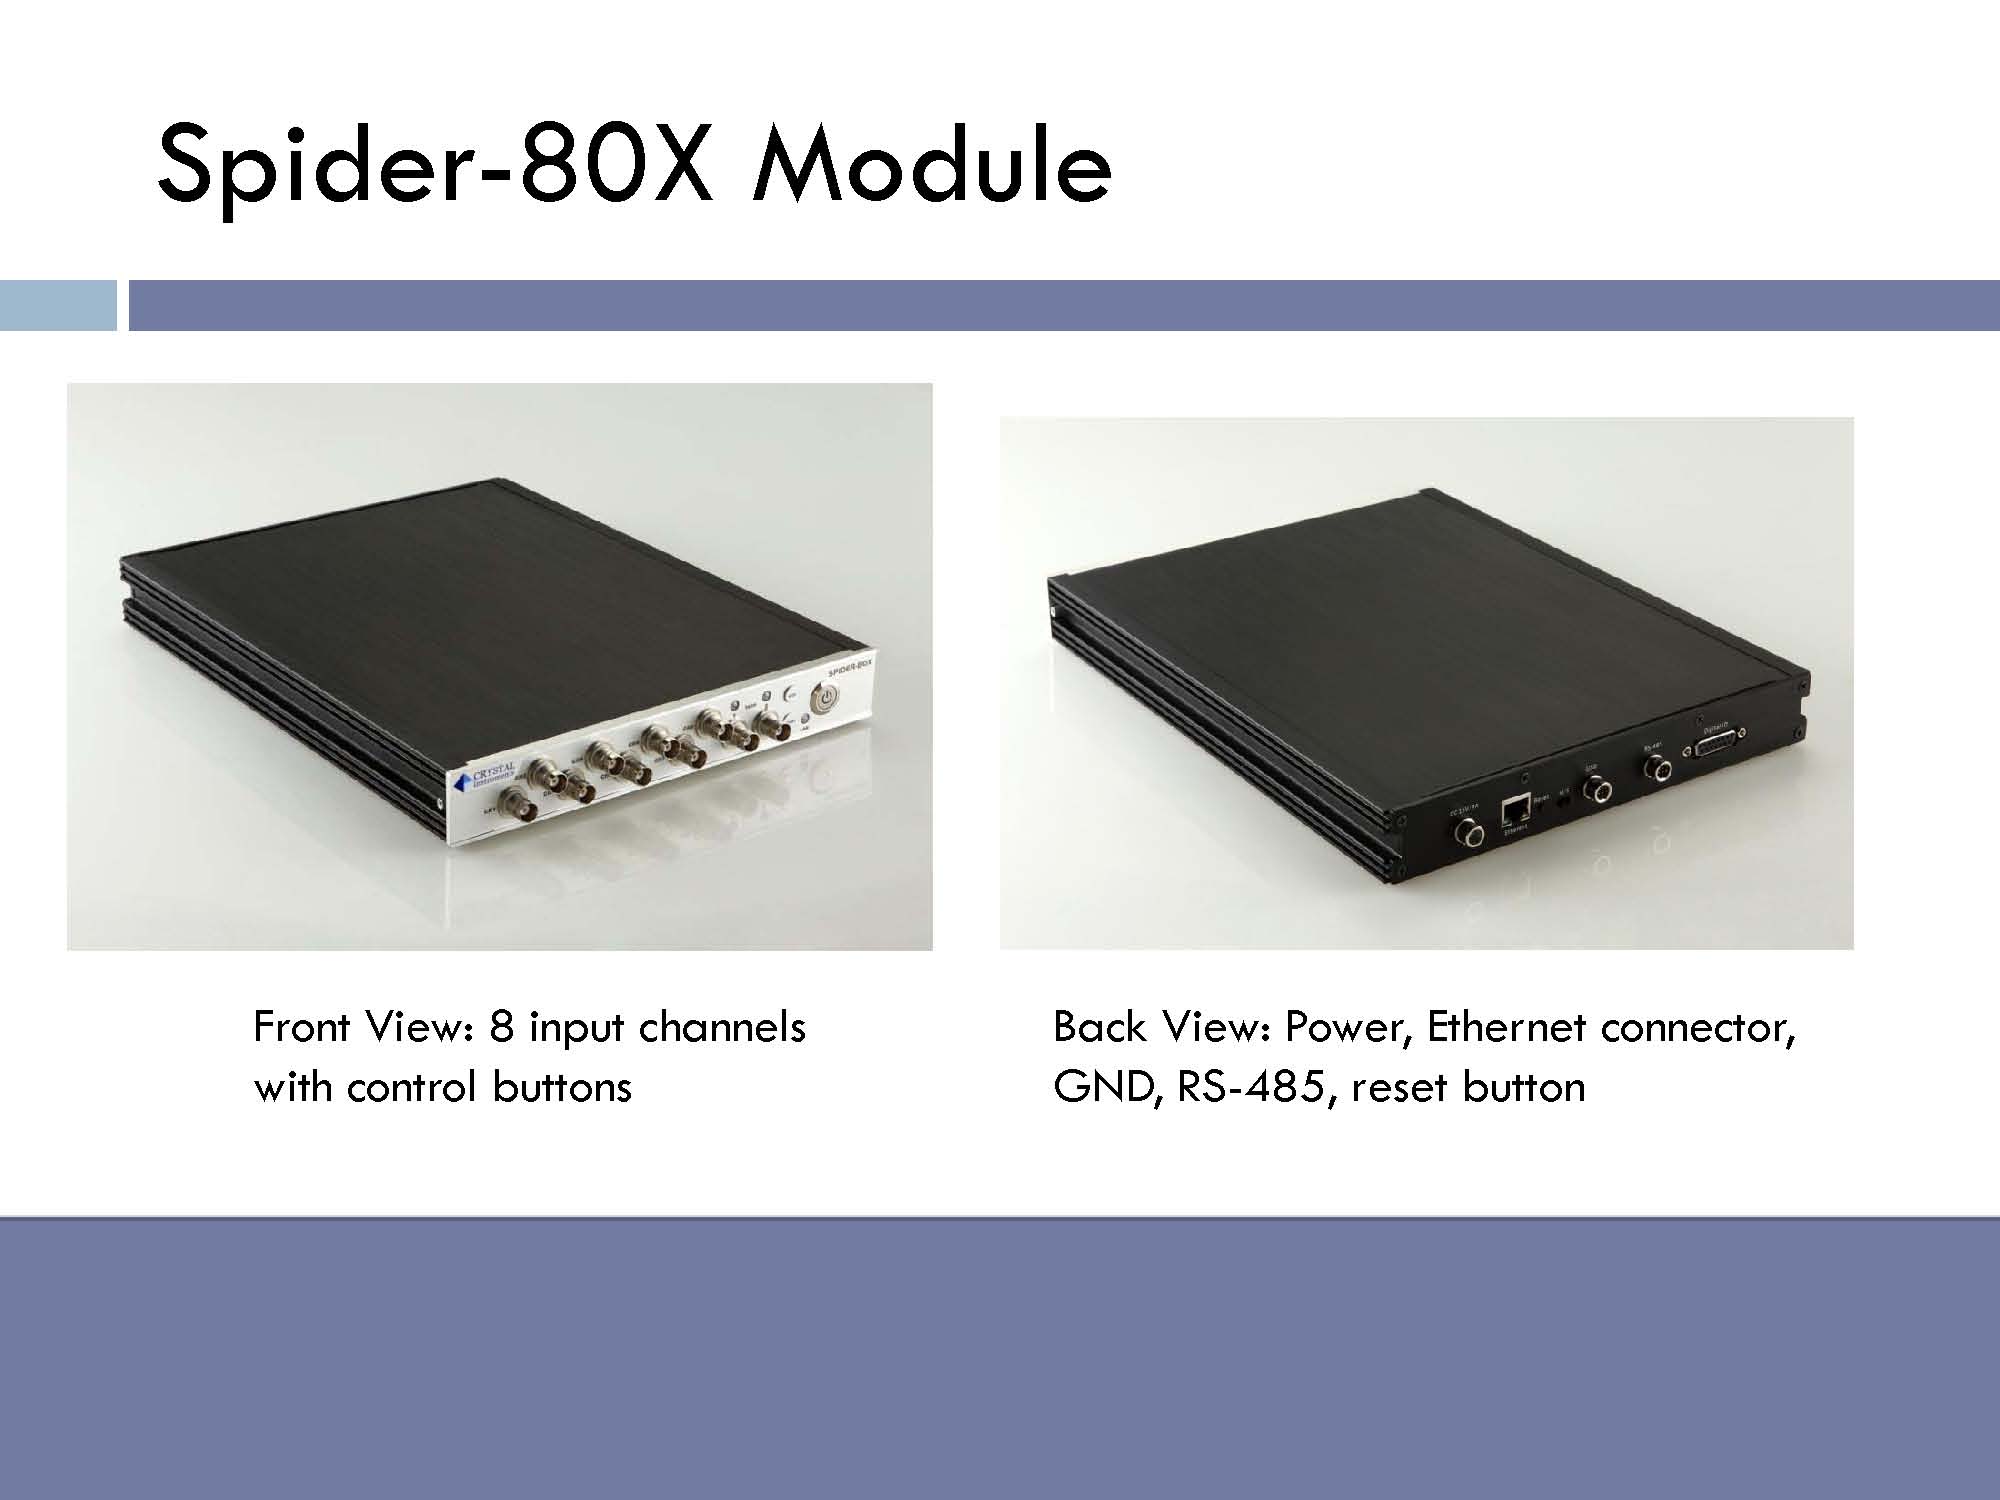   Spider-80X module: Front view, 8 input channels with control buttons. Back view: power, Ethernet connector, GND, RS-485, reset button.  